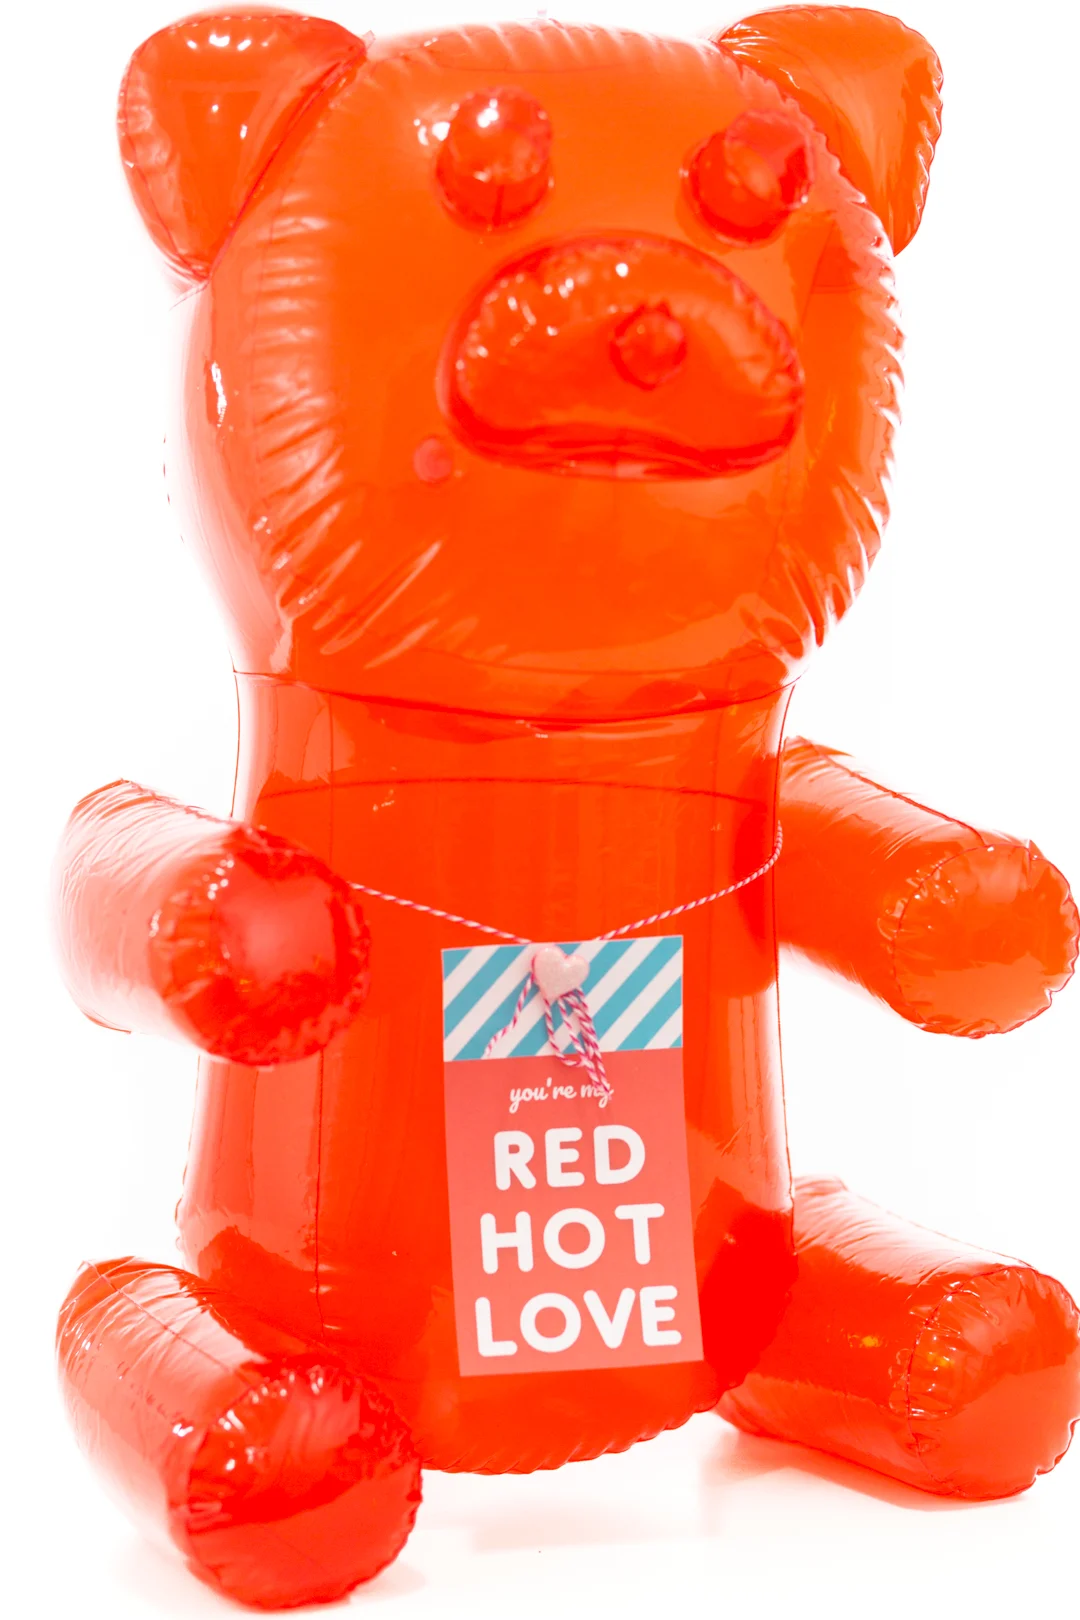 Giant Gummy Bear (Red) - Themed Props, Décor & Props - Pacific